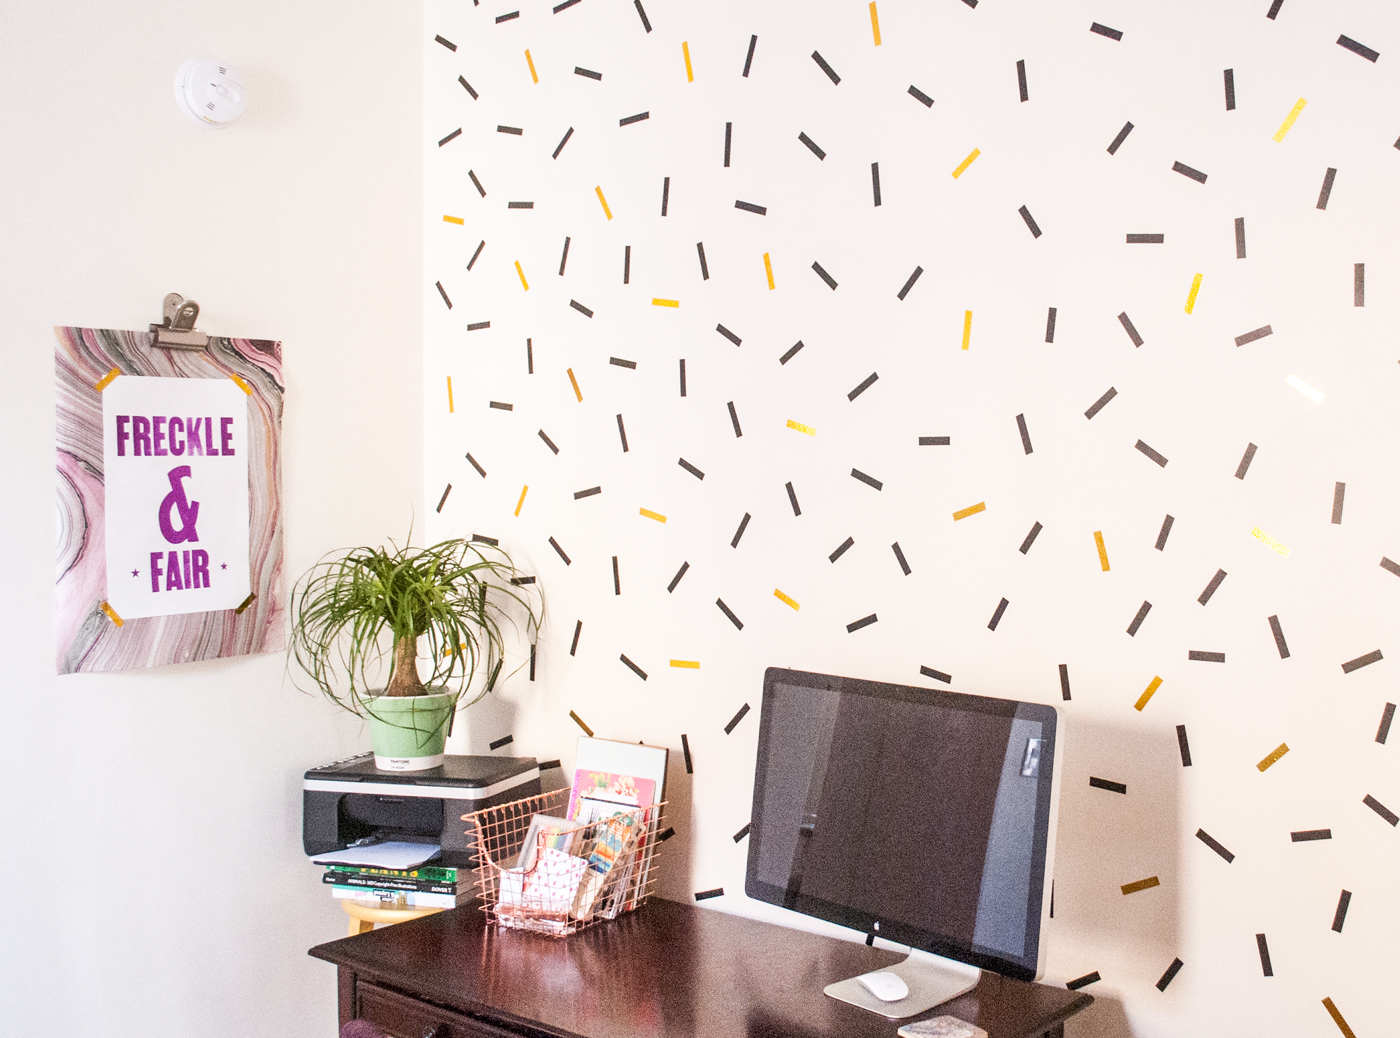 Diy Oversized Confetti Mural Using Washi Tape Freckle Fair Recipes Diy Tutorials Travel Guides And General Awesomeness,Interior 3d Architecture Design